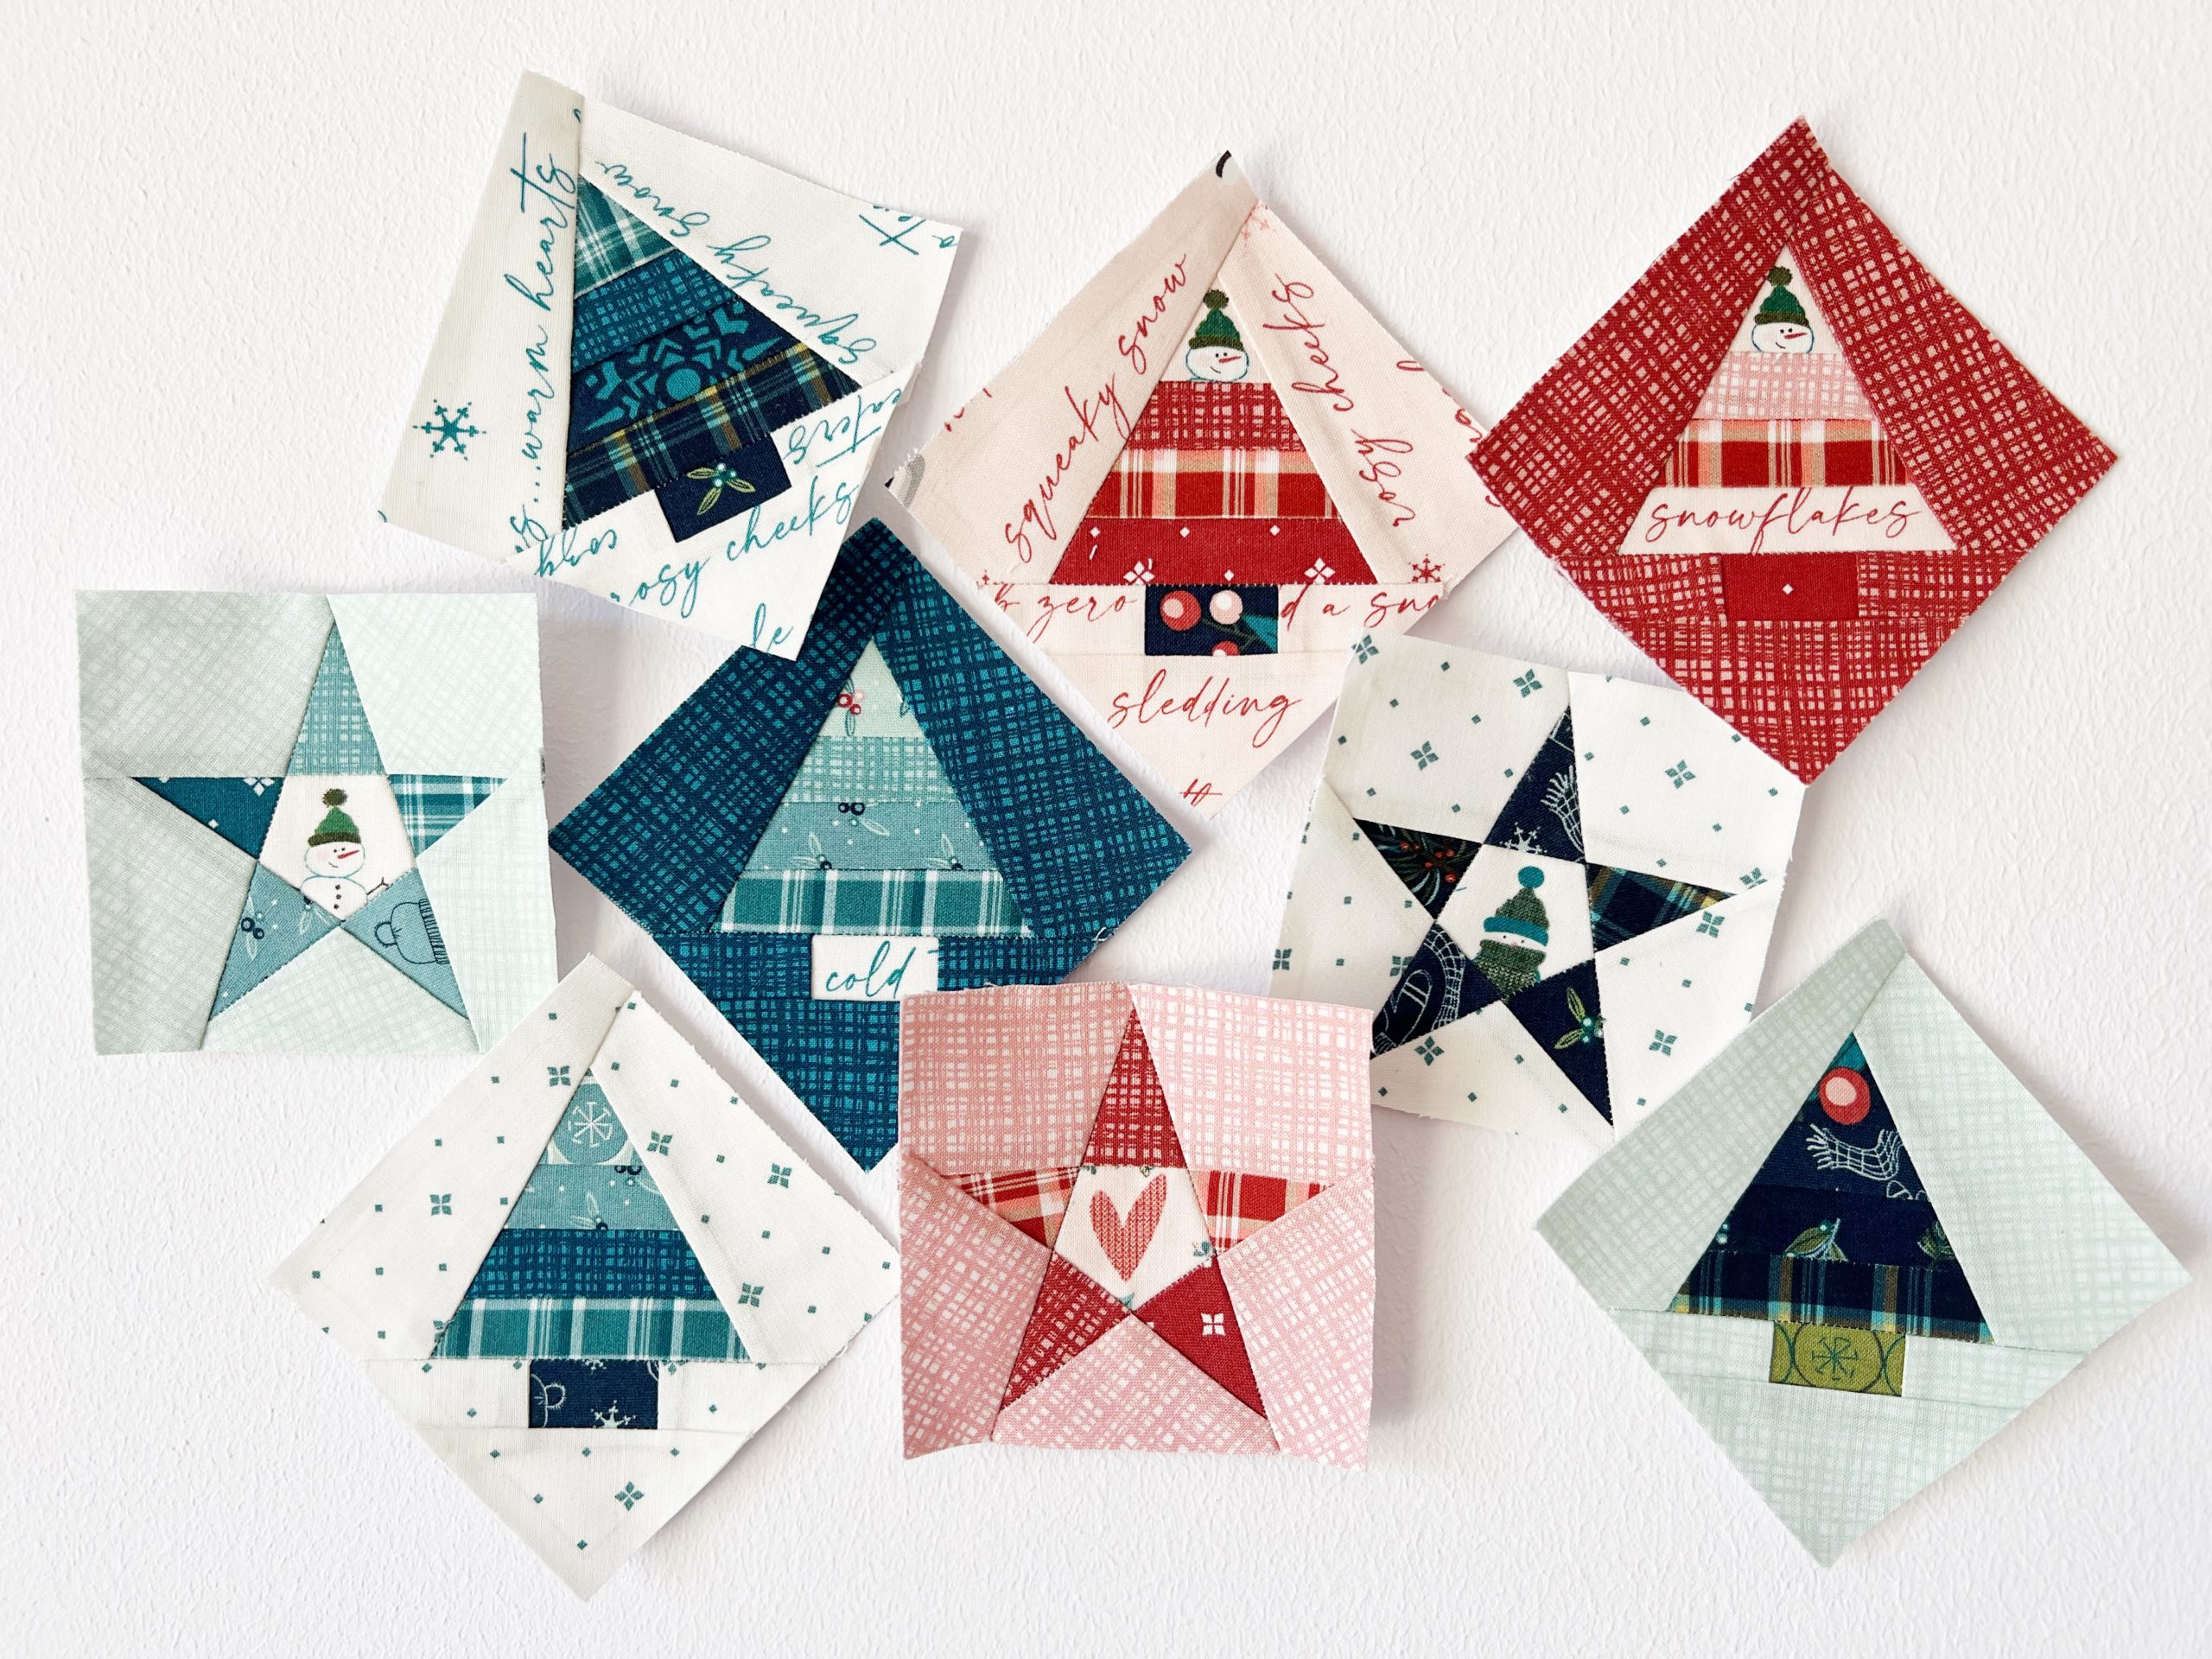 quilted Christmas ornaments